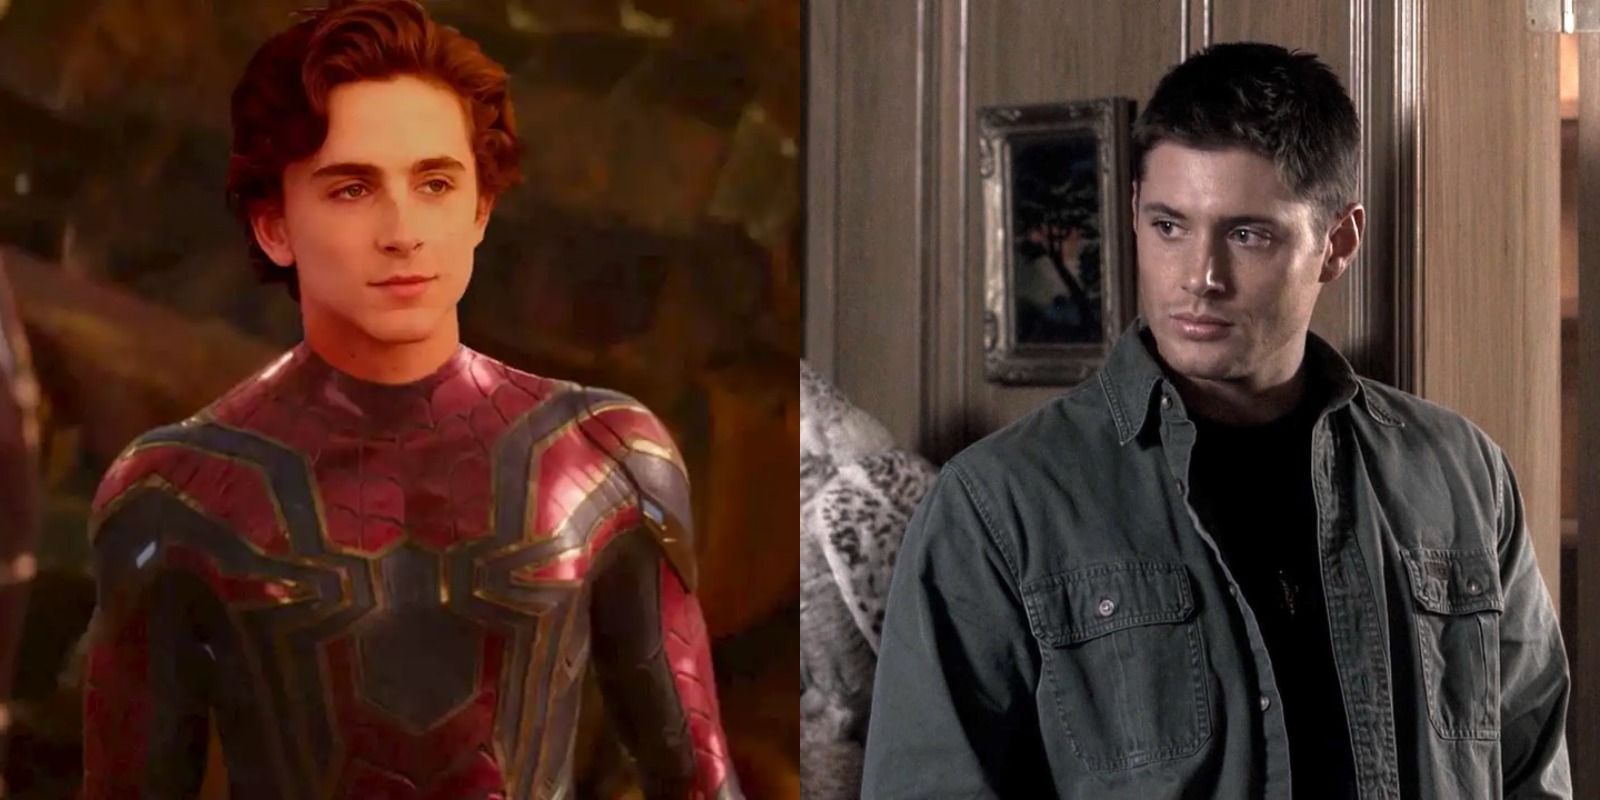 Timothee Chalamet and Jensen Ackles for AU MCU castings